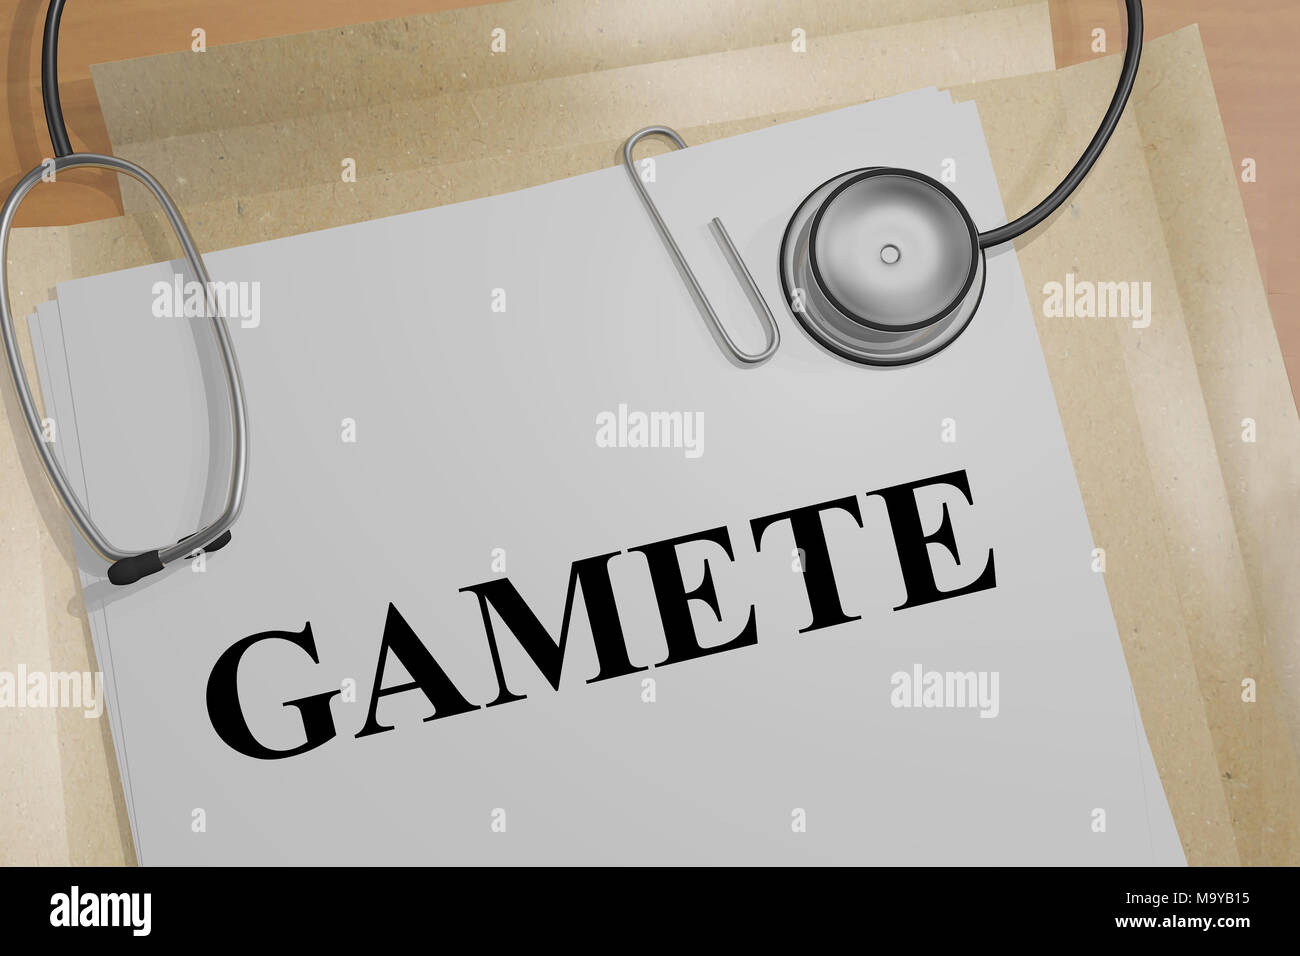 3D illustration of GAMETE title on a medical document Stock Photo